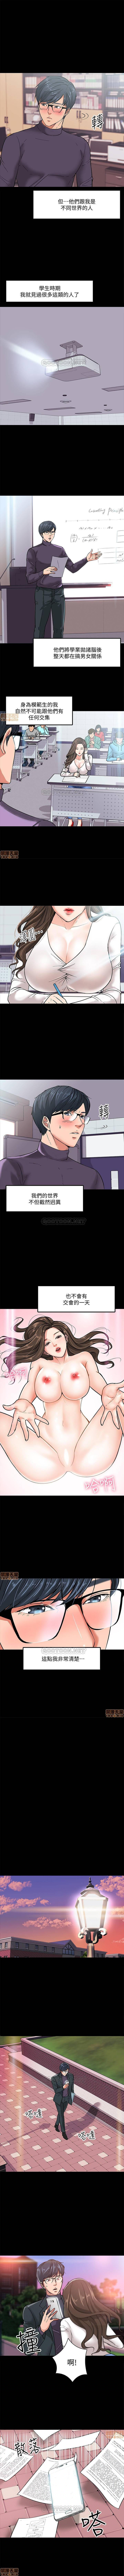 PROFESSOR, ARE YOU JUST GOING TO LOOK AT ME? | DESIRE SWAMP | 教授，你還等什麼? Ch. 2 [Chinese] Manhwa 5